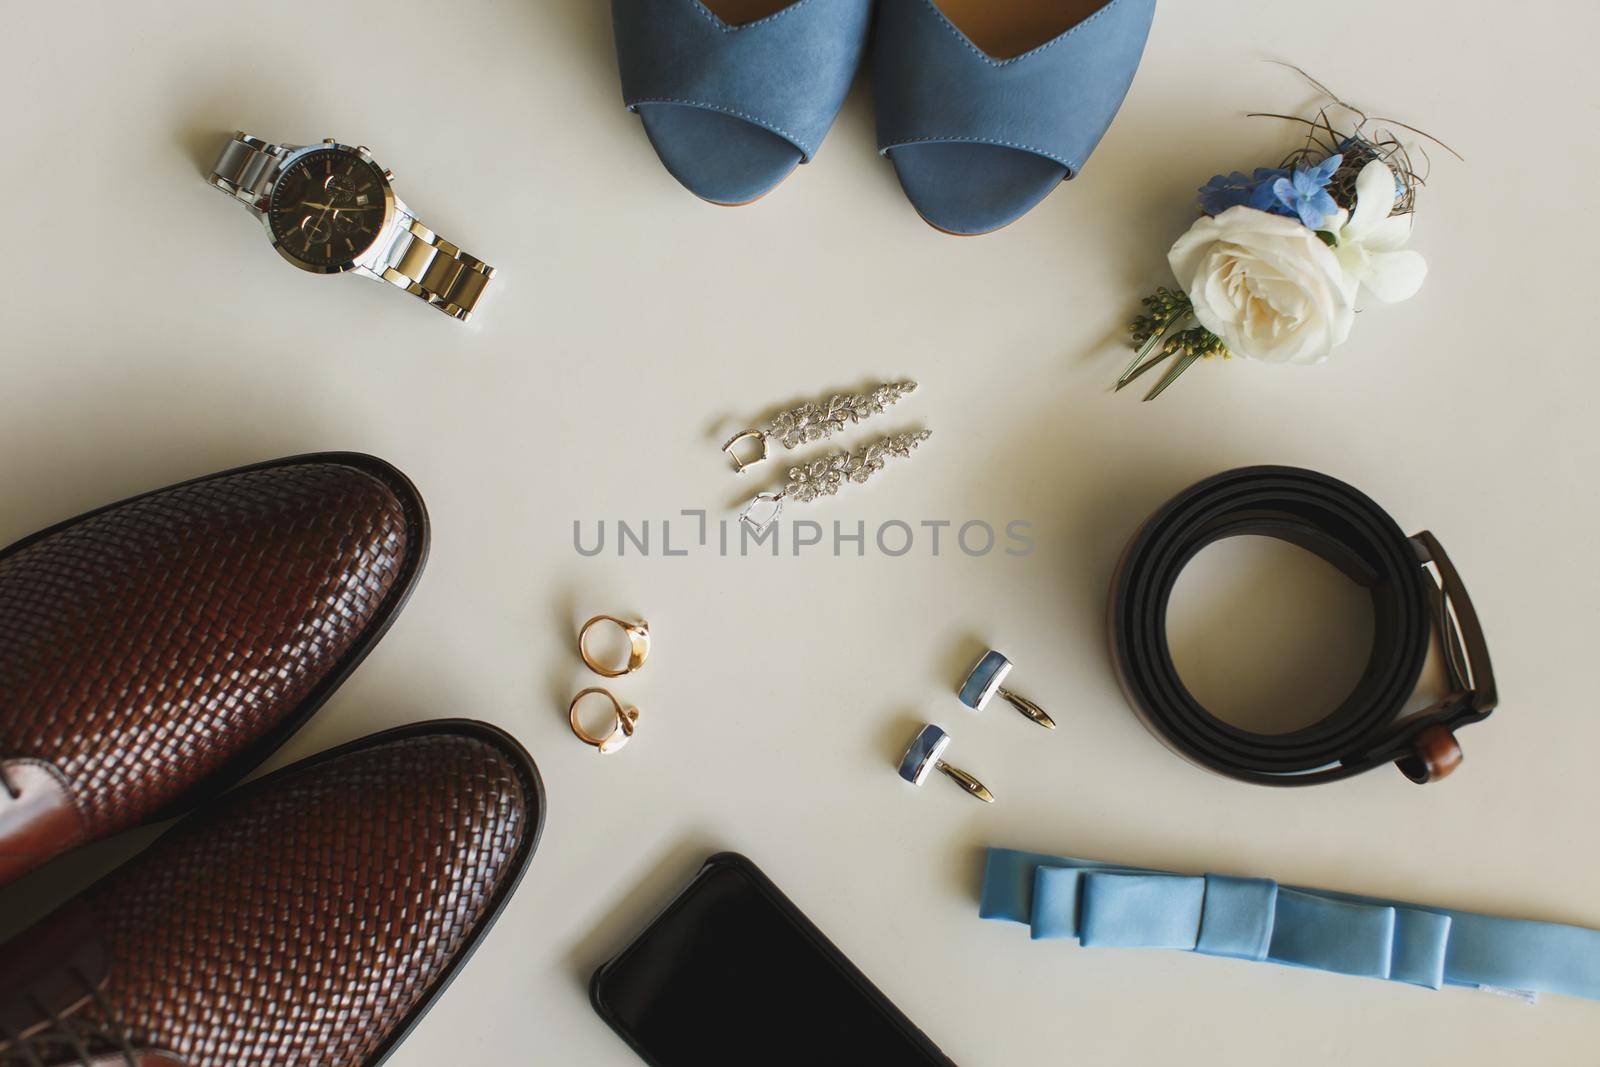 Men's and women's wedding accessories on the table.